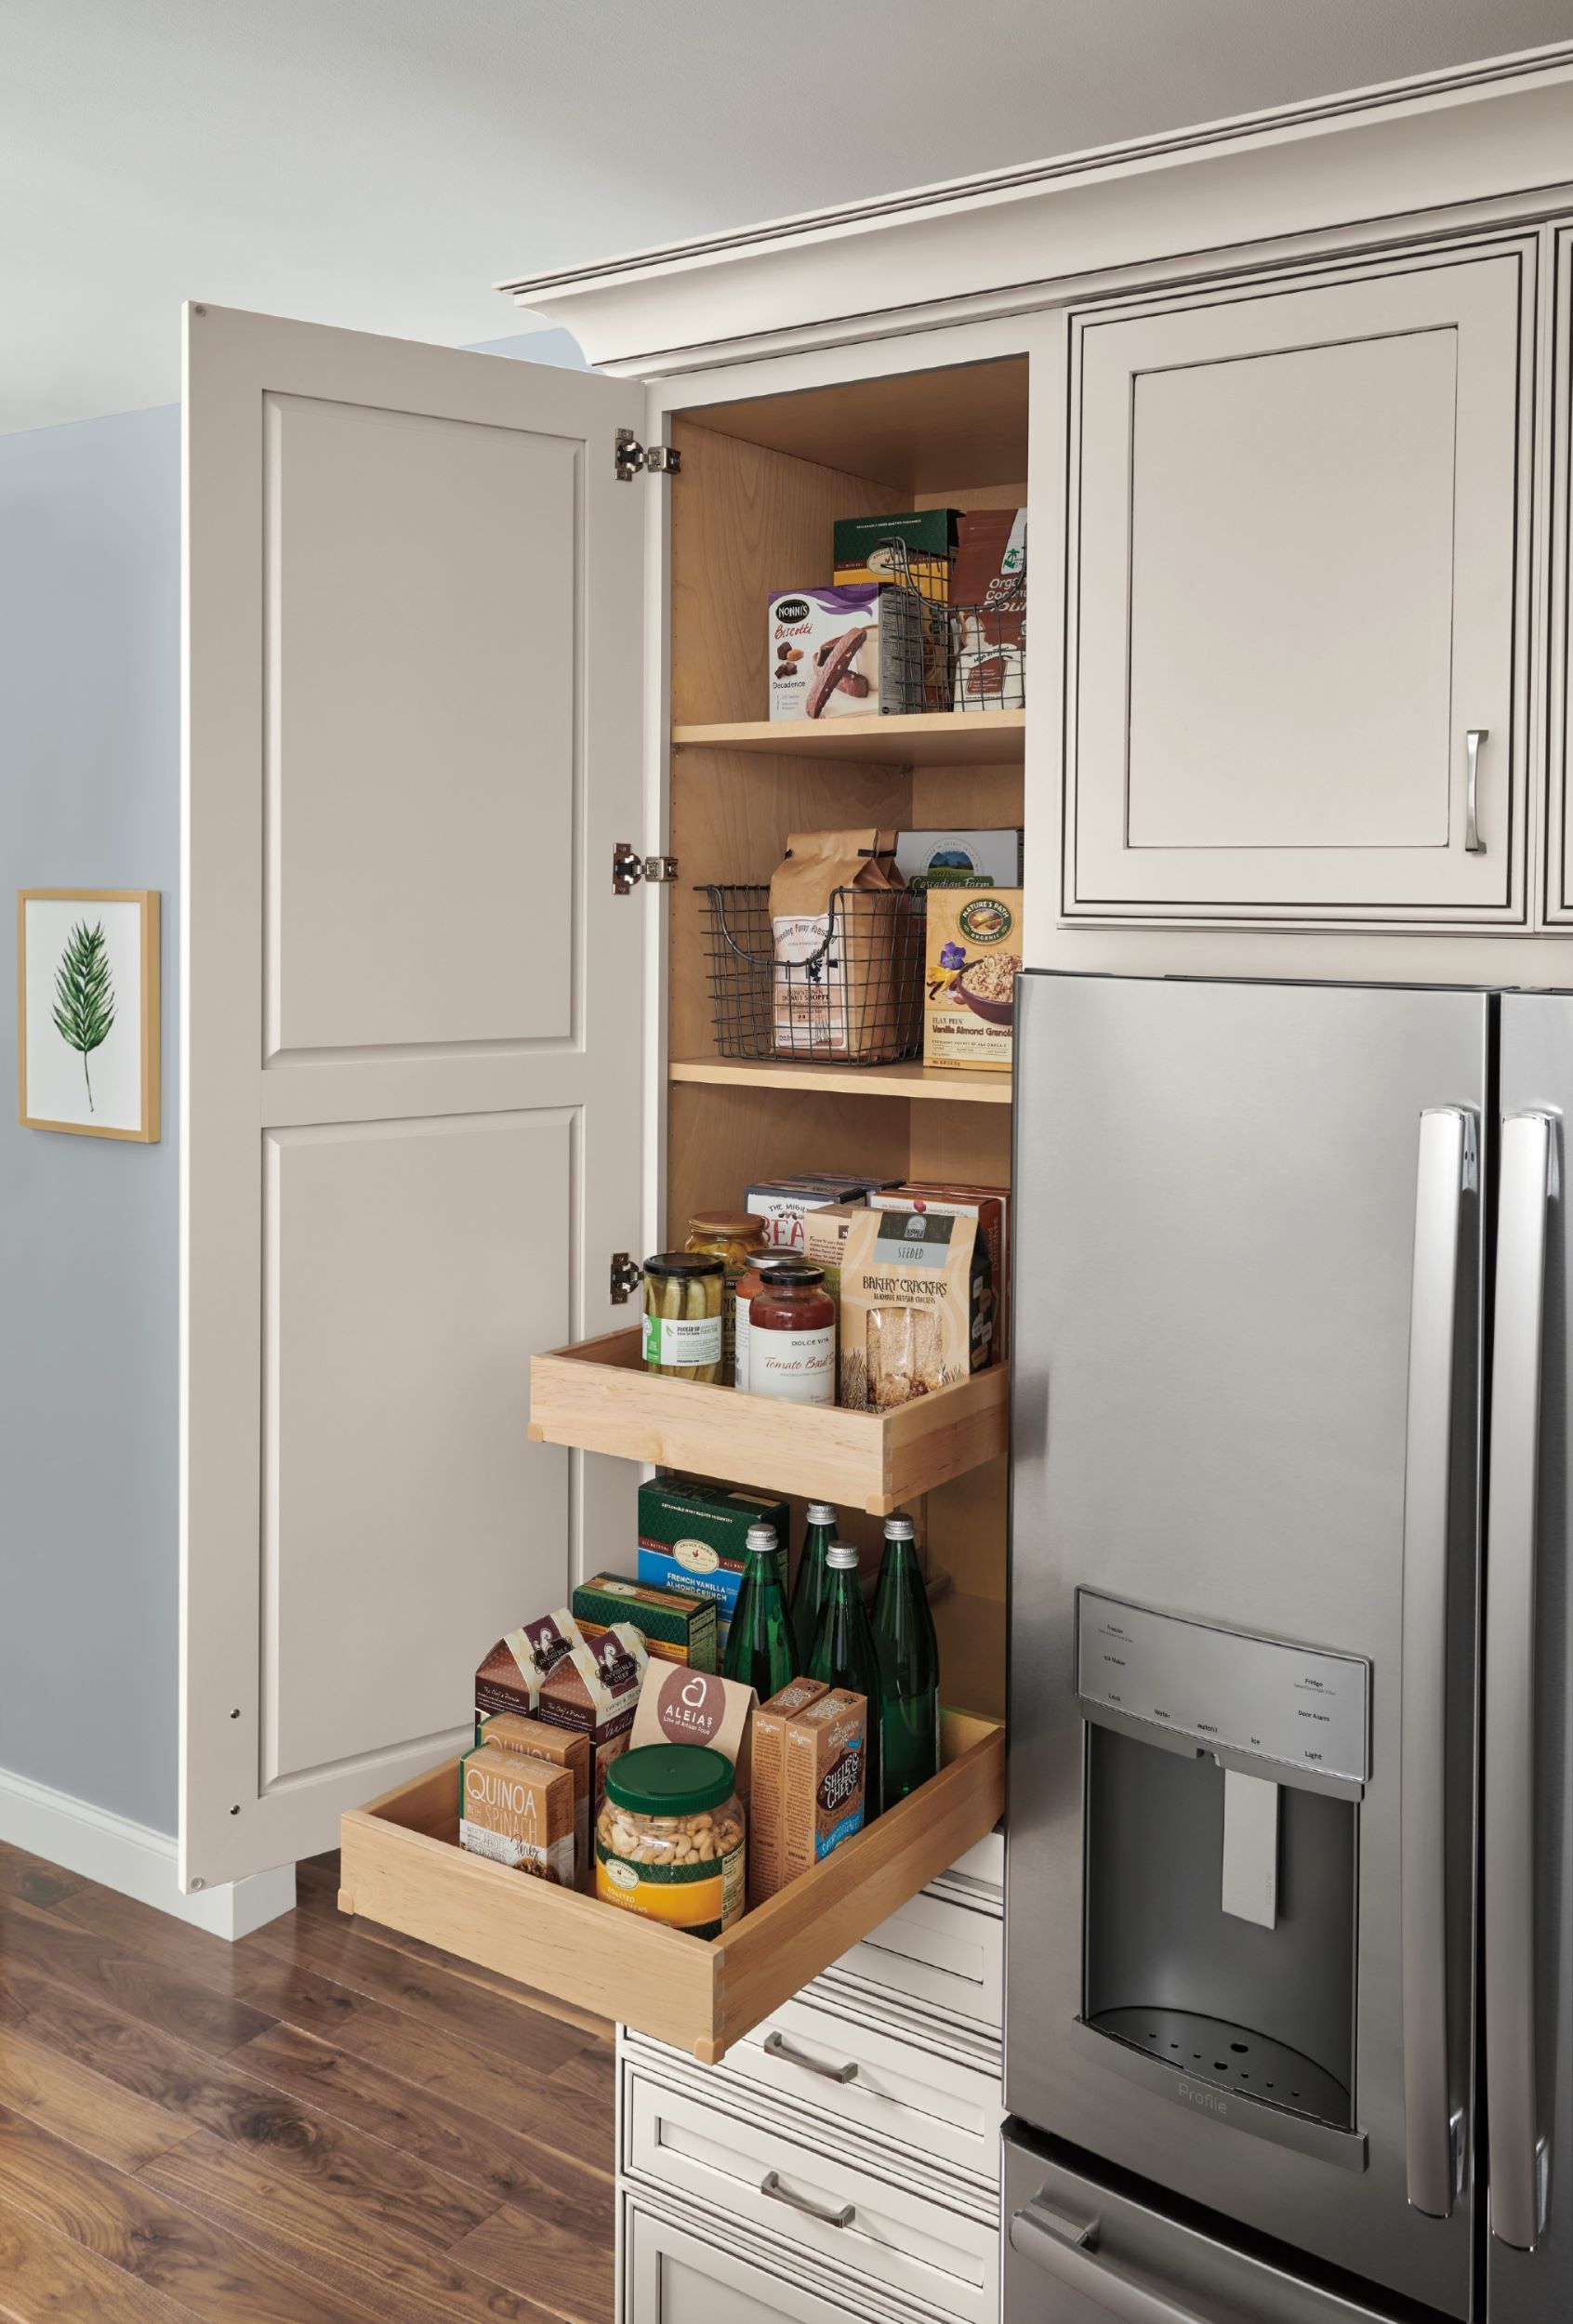 Diamond at Lowes - Organization - Tall Utility Cabinet with Three